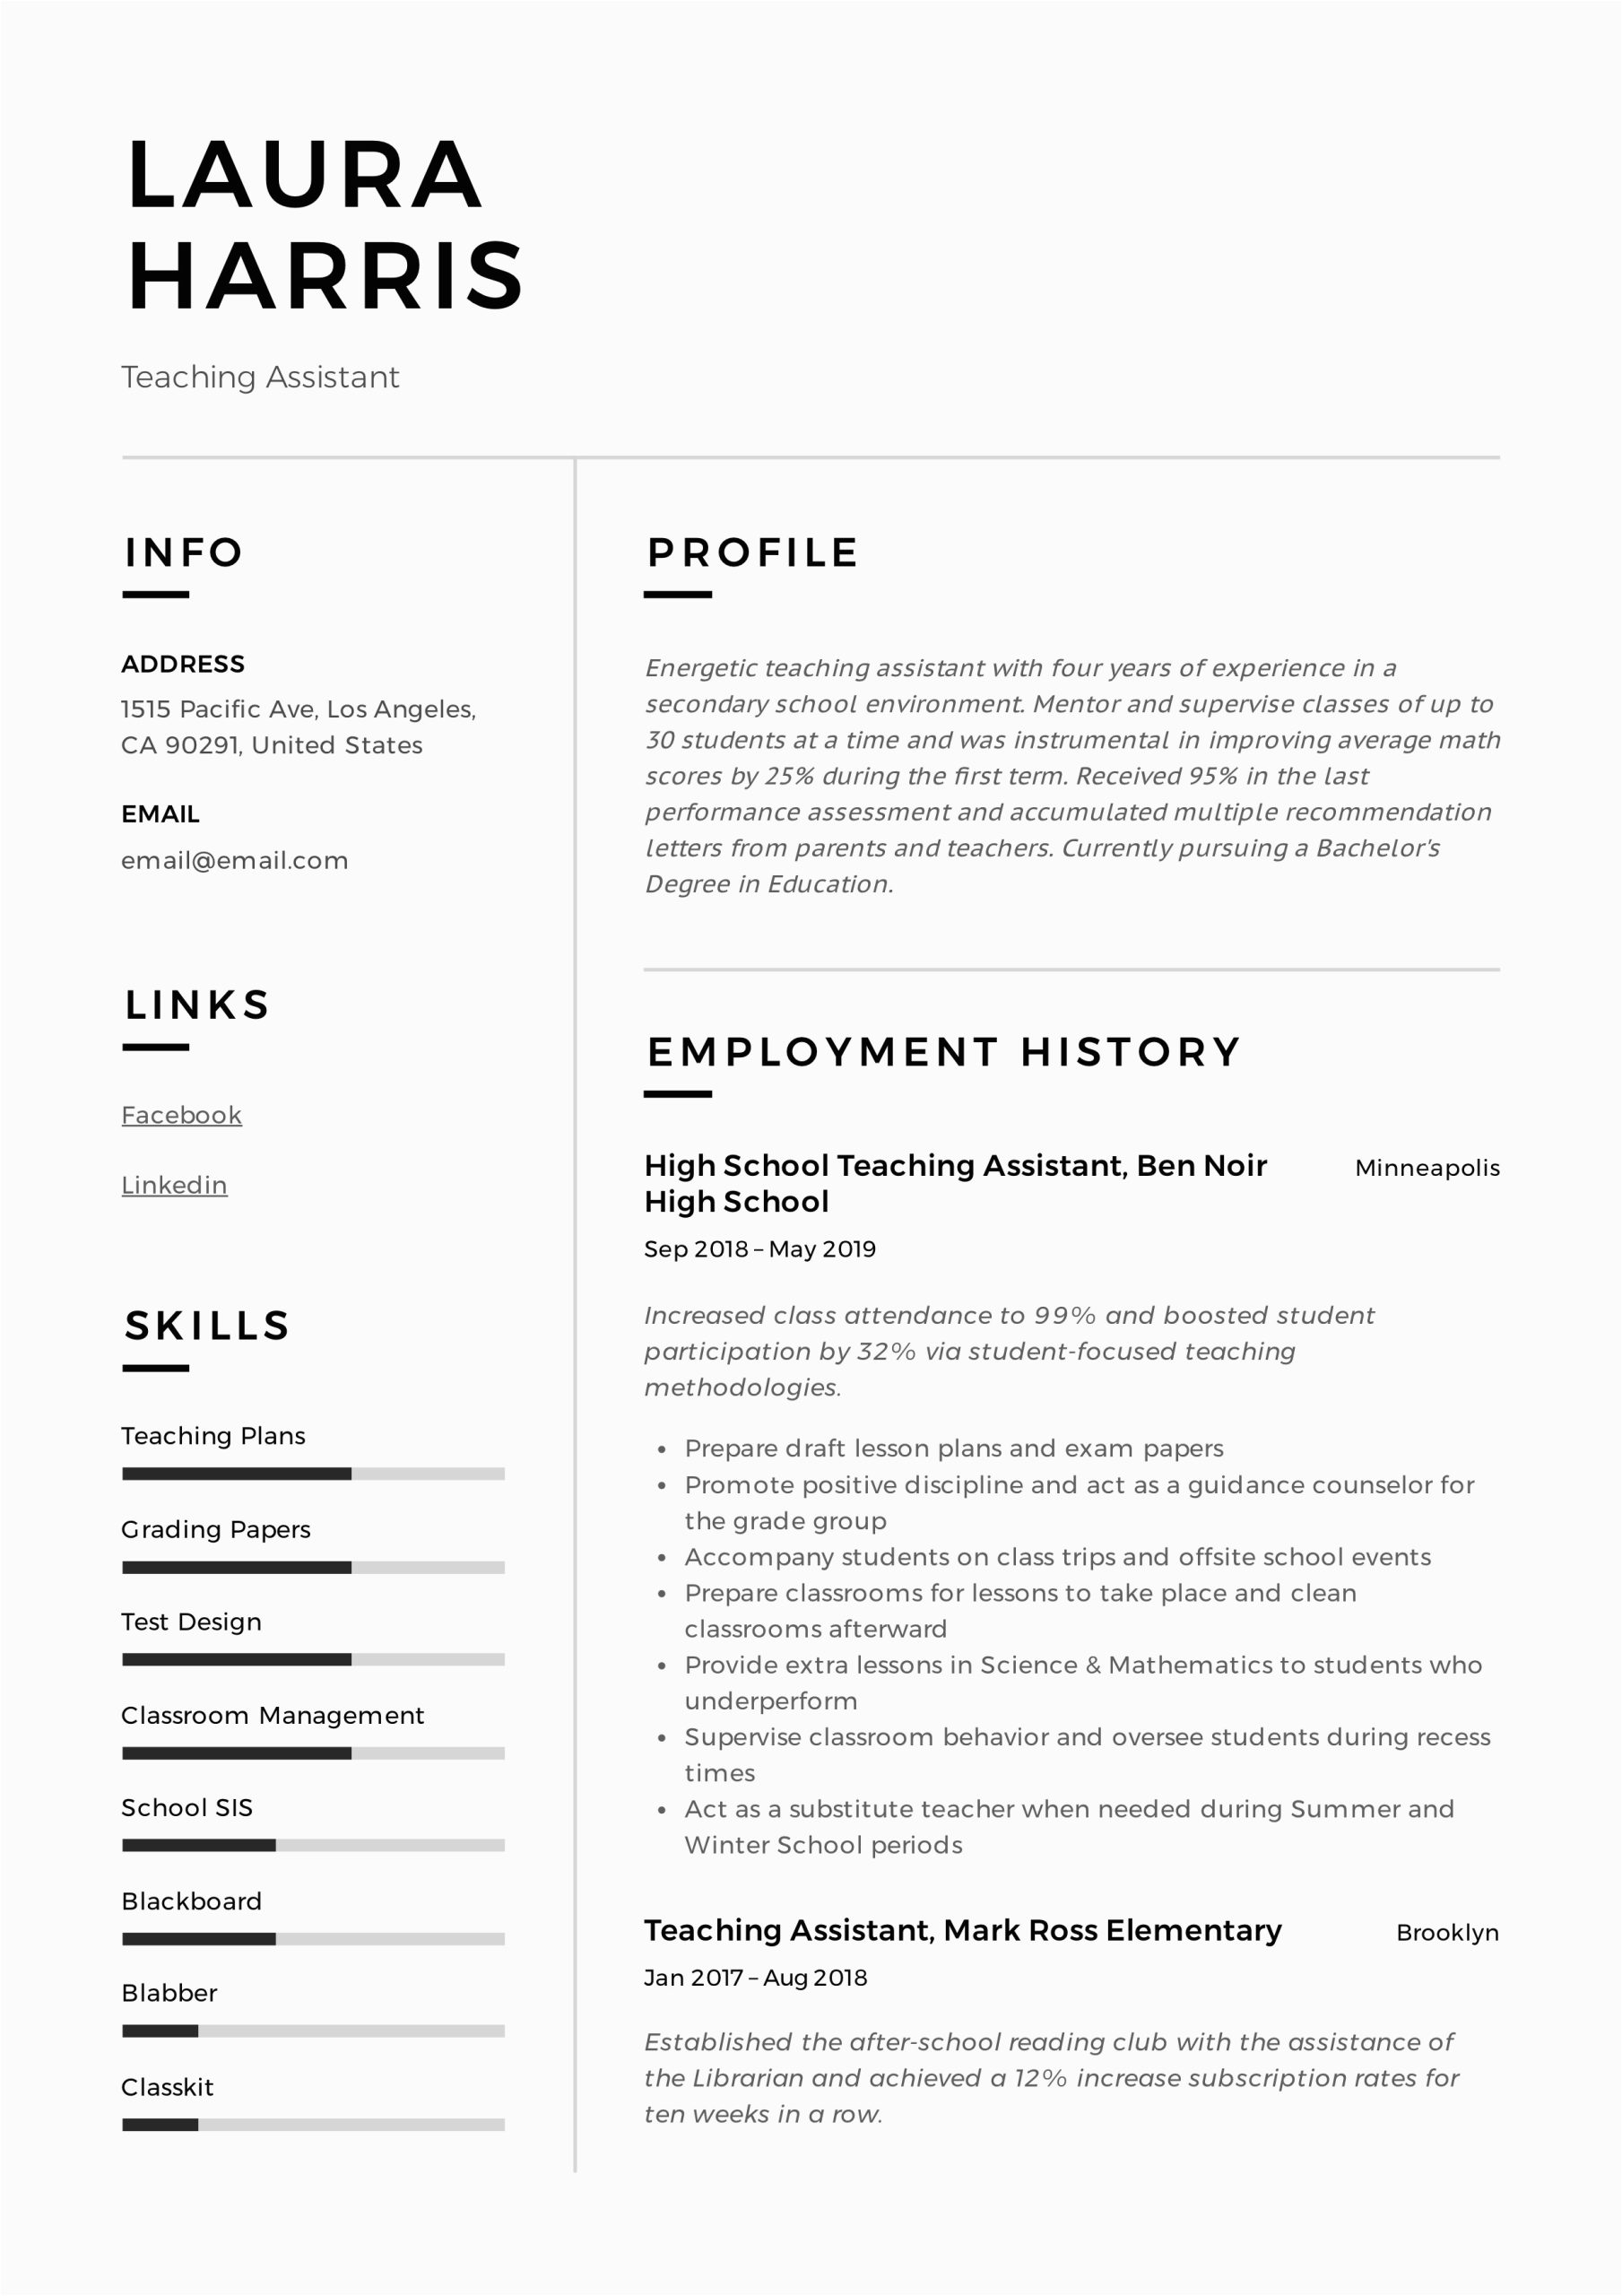 Free Resume Samples for Teacher assistant Teaching assistant Resume & Writing Guide 12 Templates